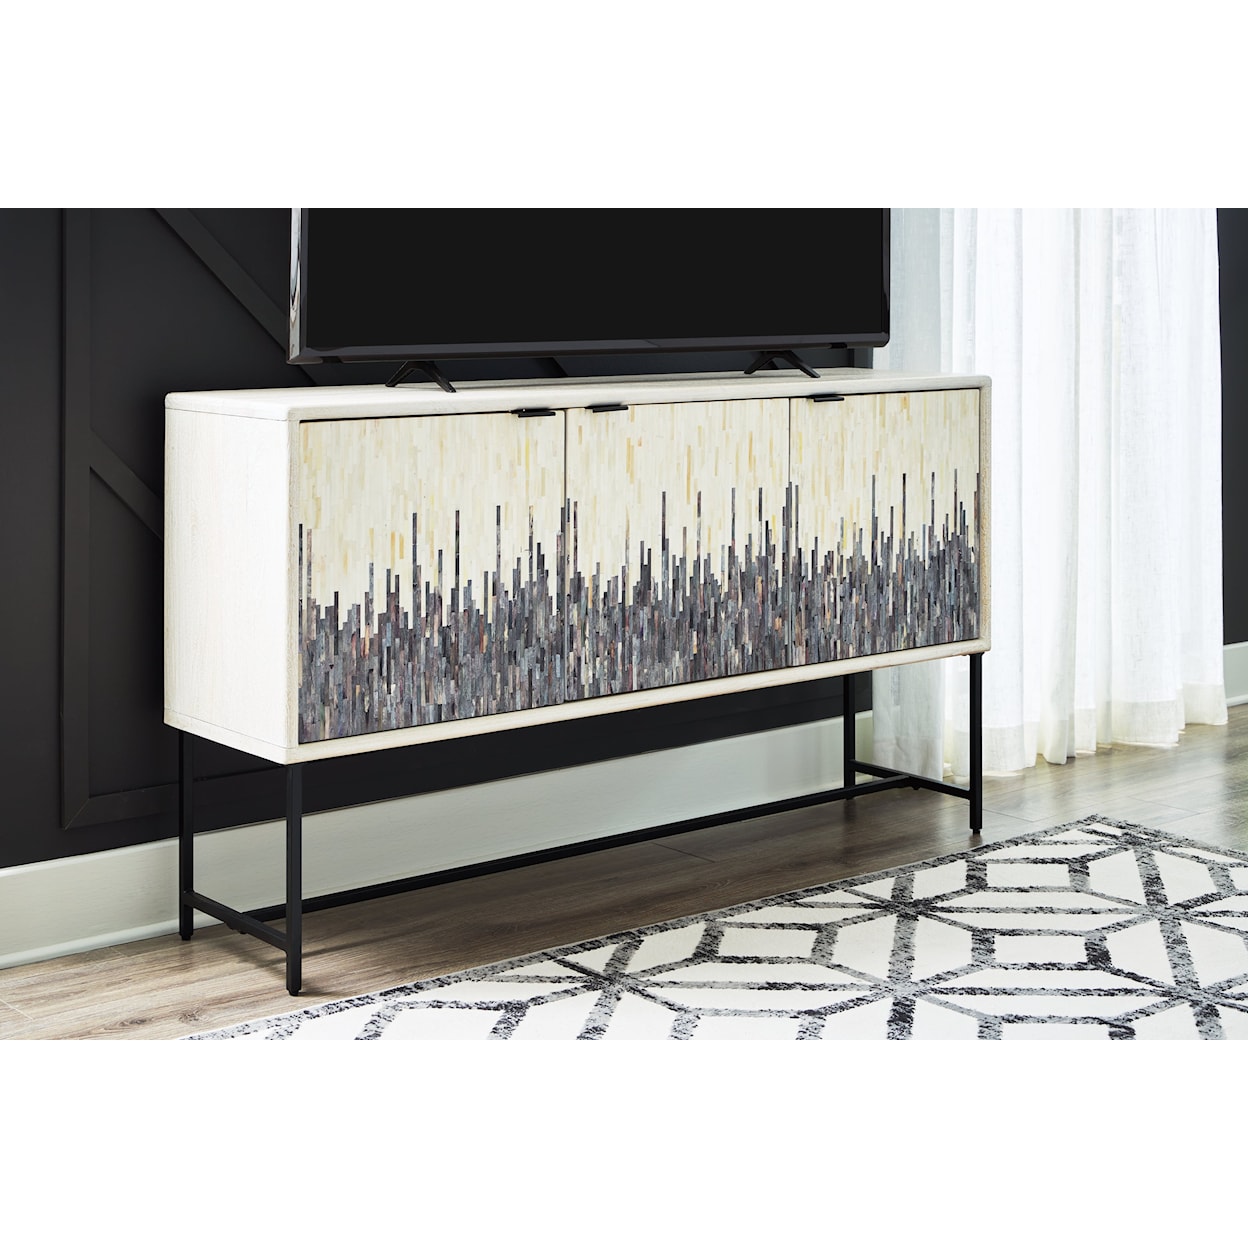 Signature Design by Ashley Freyton Accent Cabinet